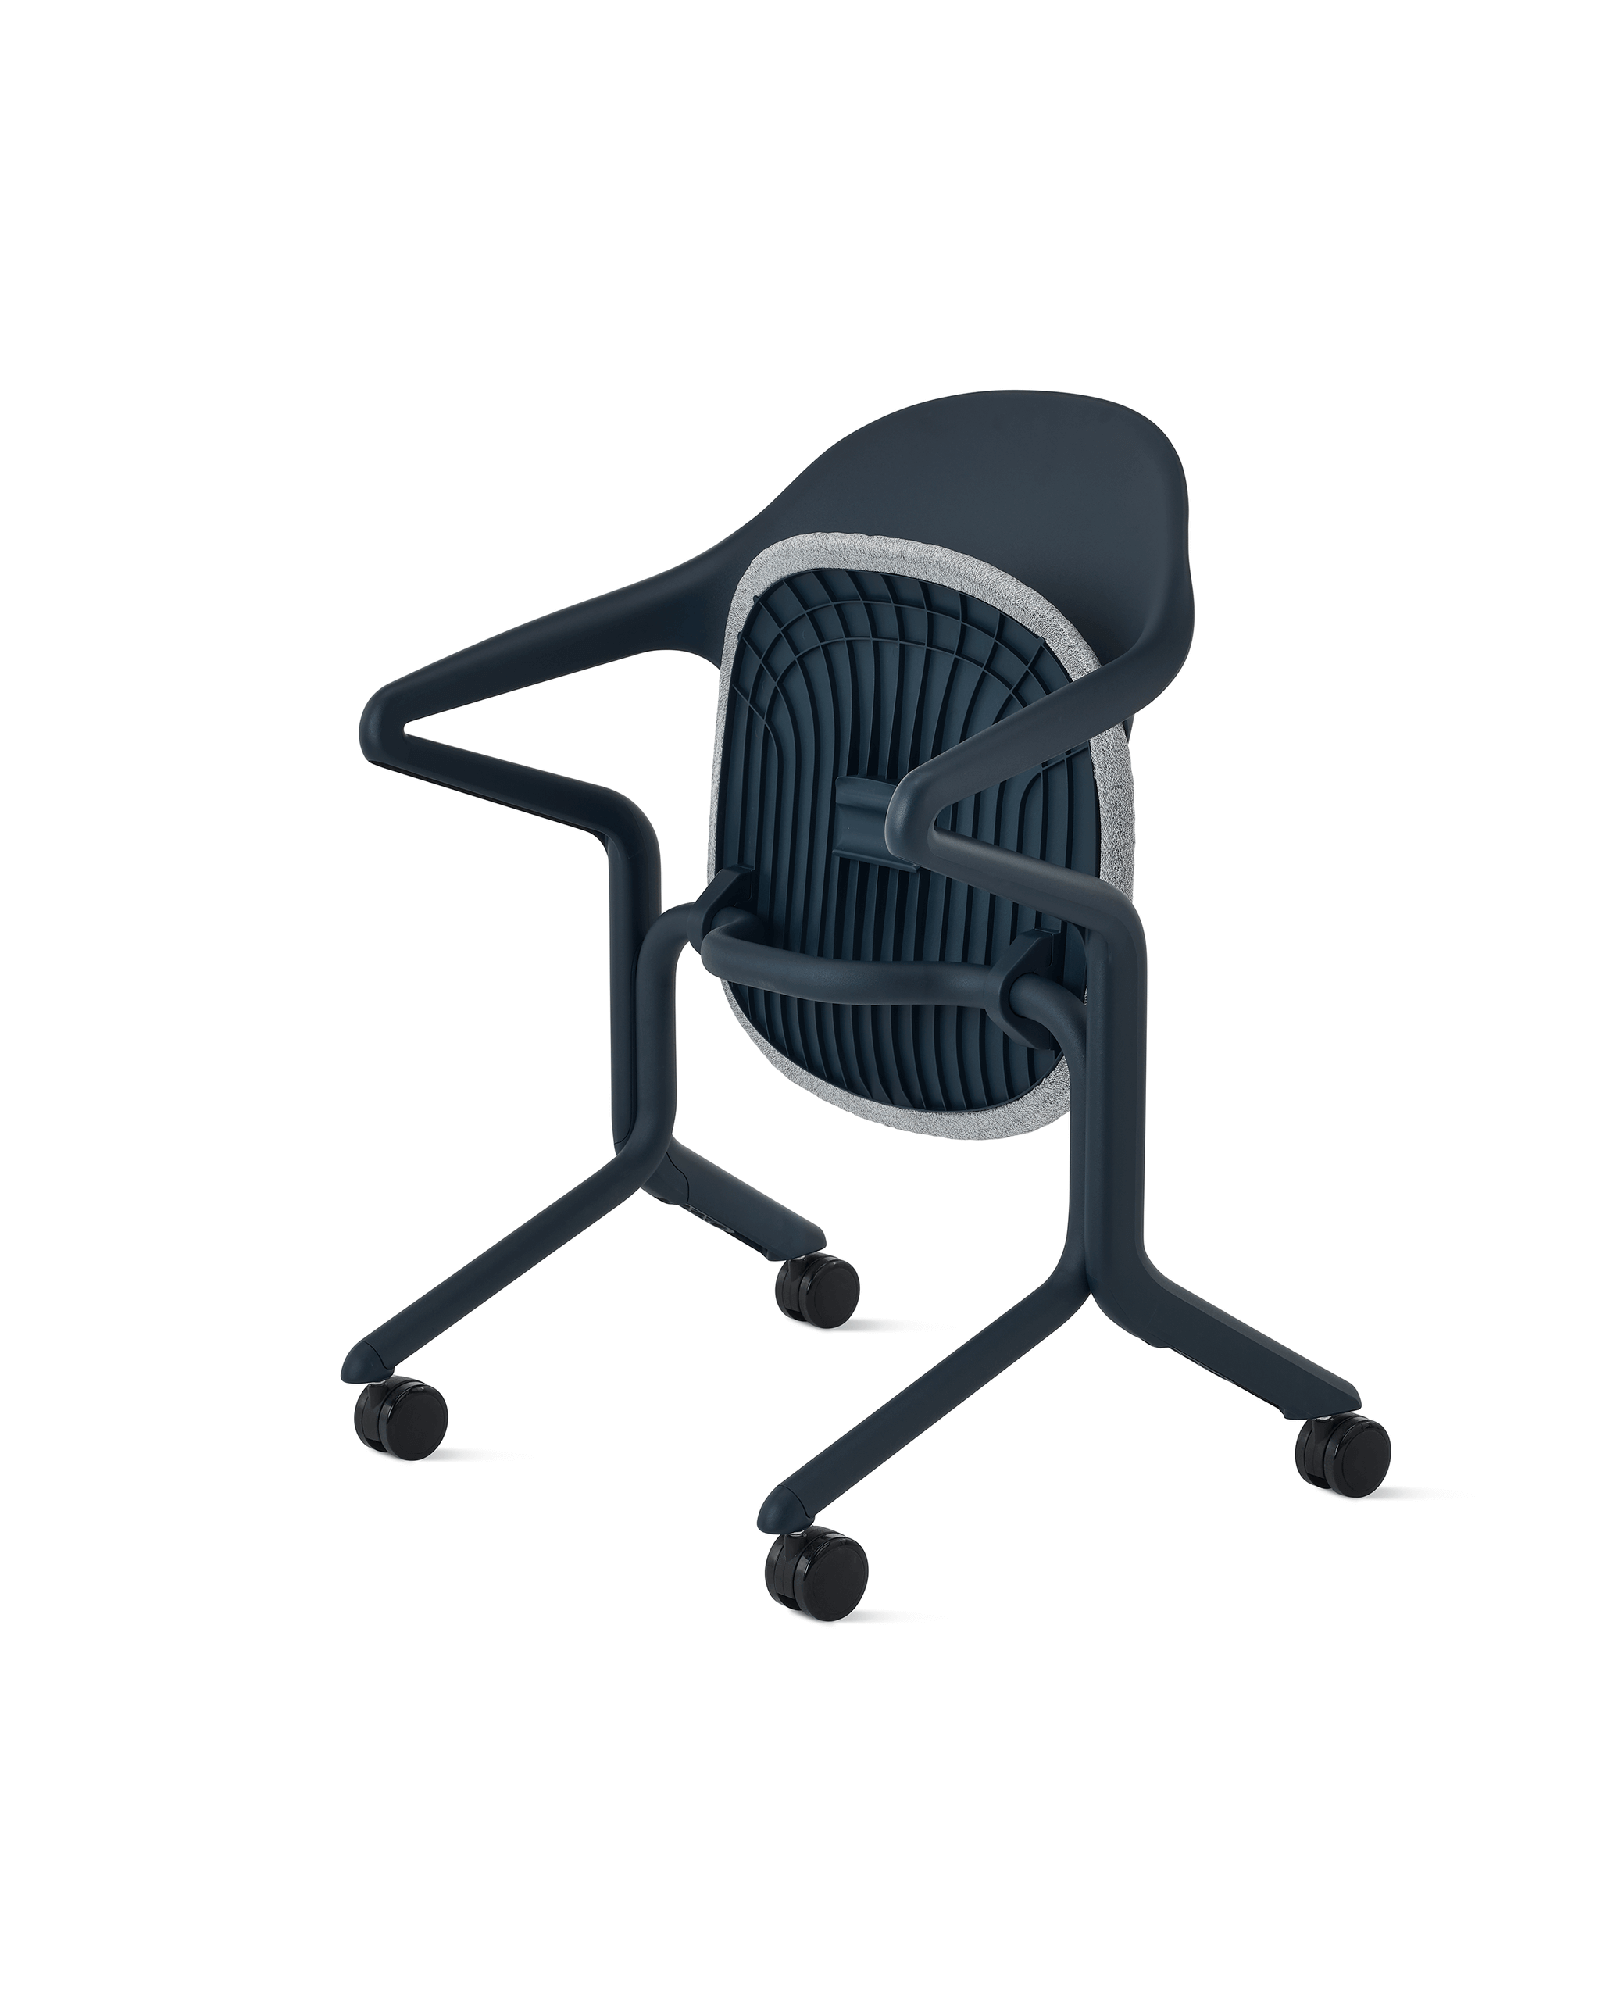 Single Flux nesting chair with blue frame and grey seat folded